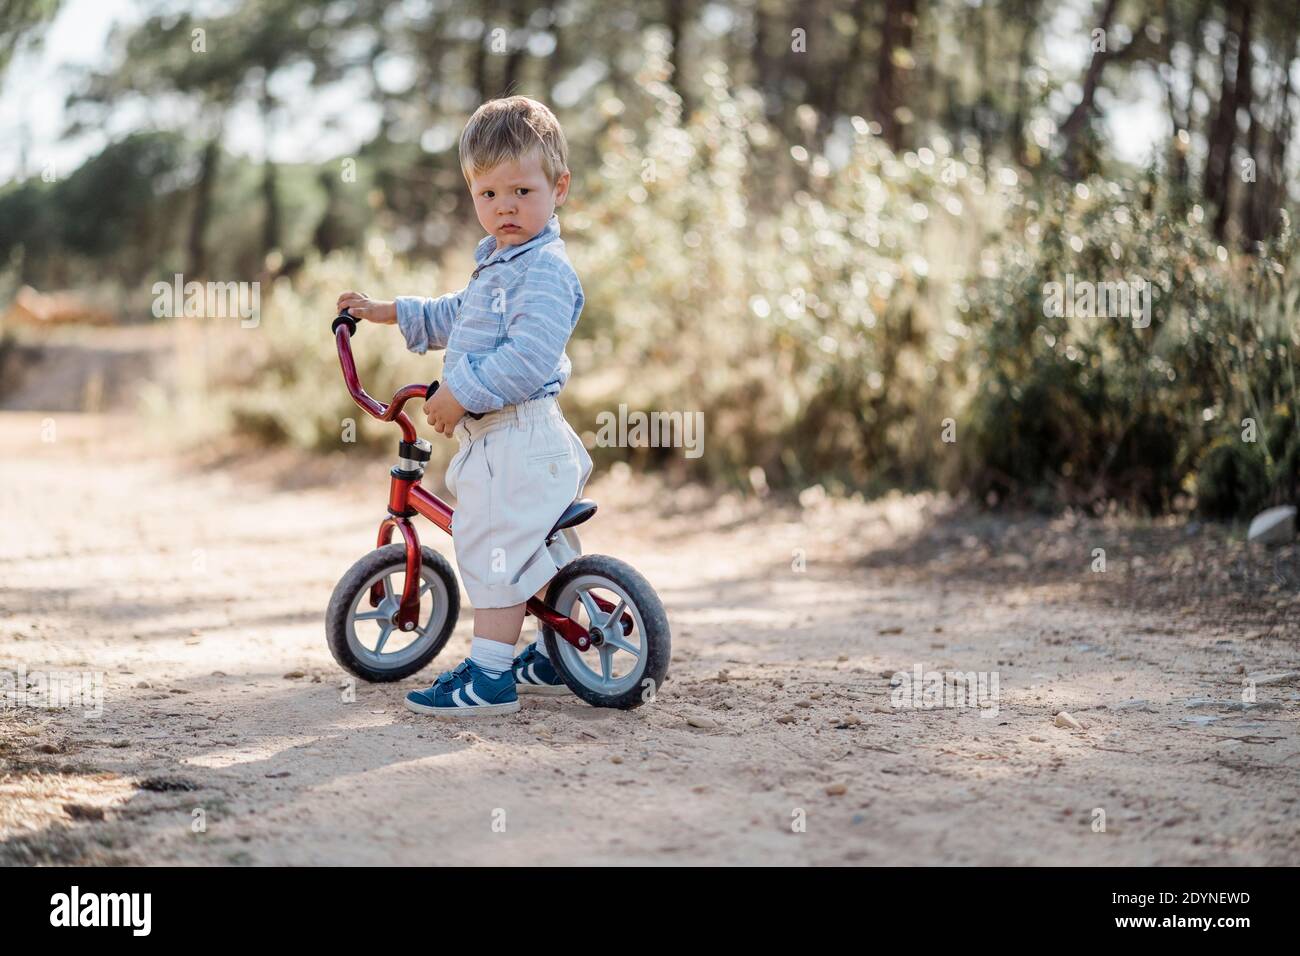 Cute toddler riding his balance bicycle on a dirt road Stock Photo